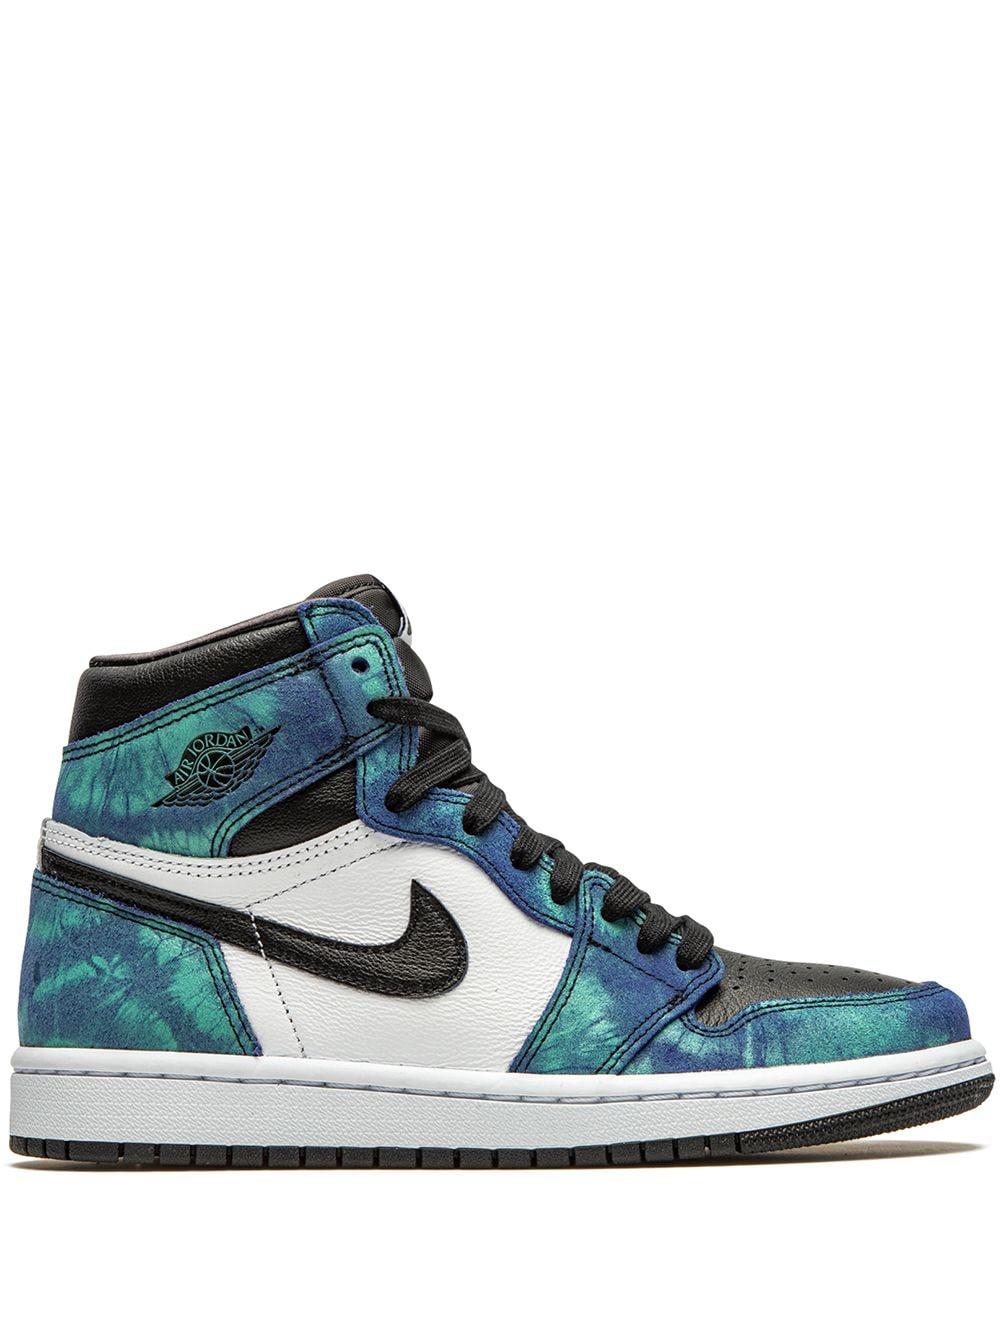 Nike Air 1 High Og Womens Shoes in | Lyst